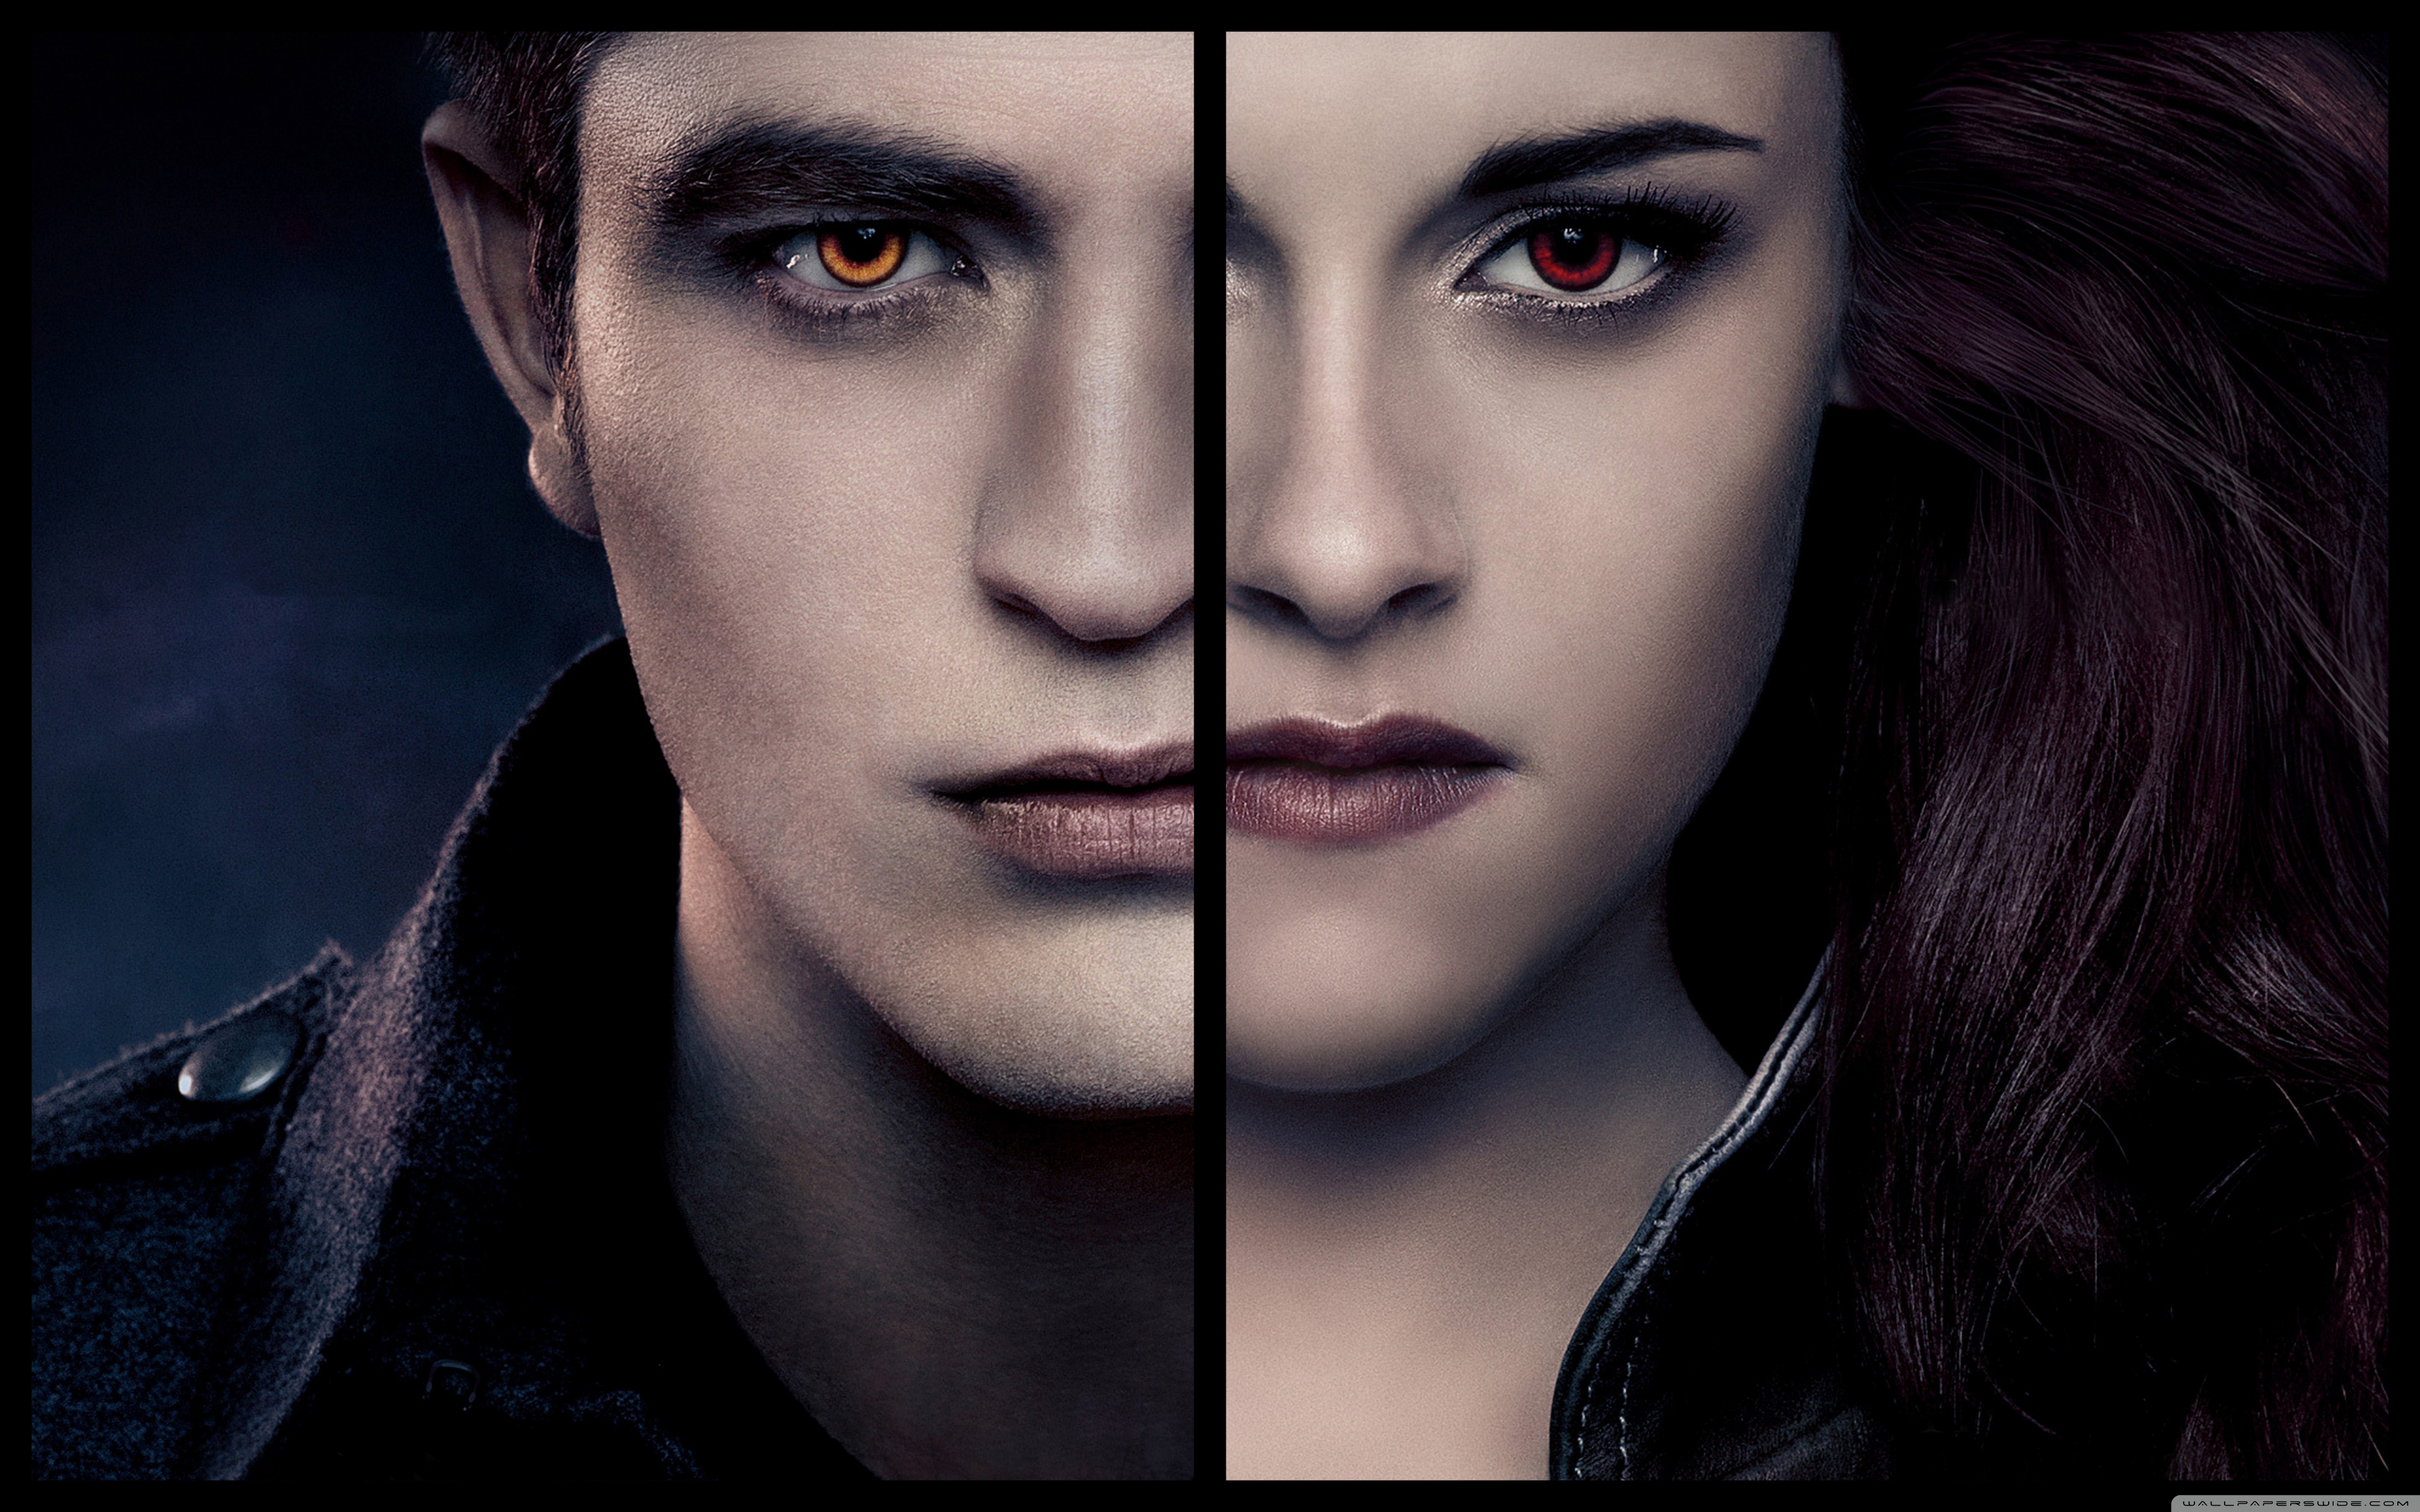 Download 21 twilight-wallpaper-edward-and-bella Edward-and-Bella-Movies-and-Entertainment-Background-.jpg